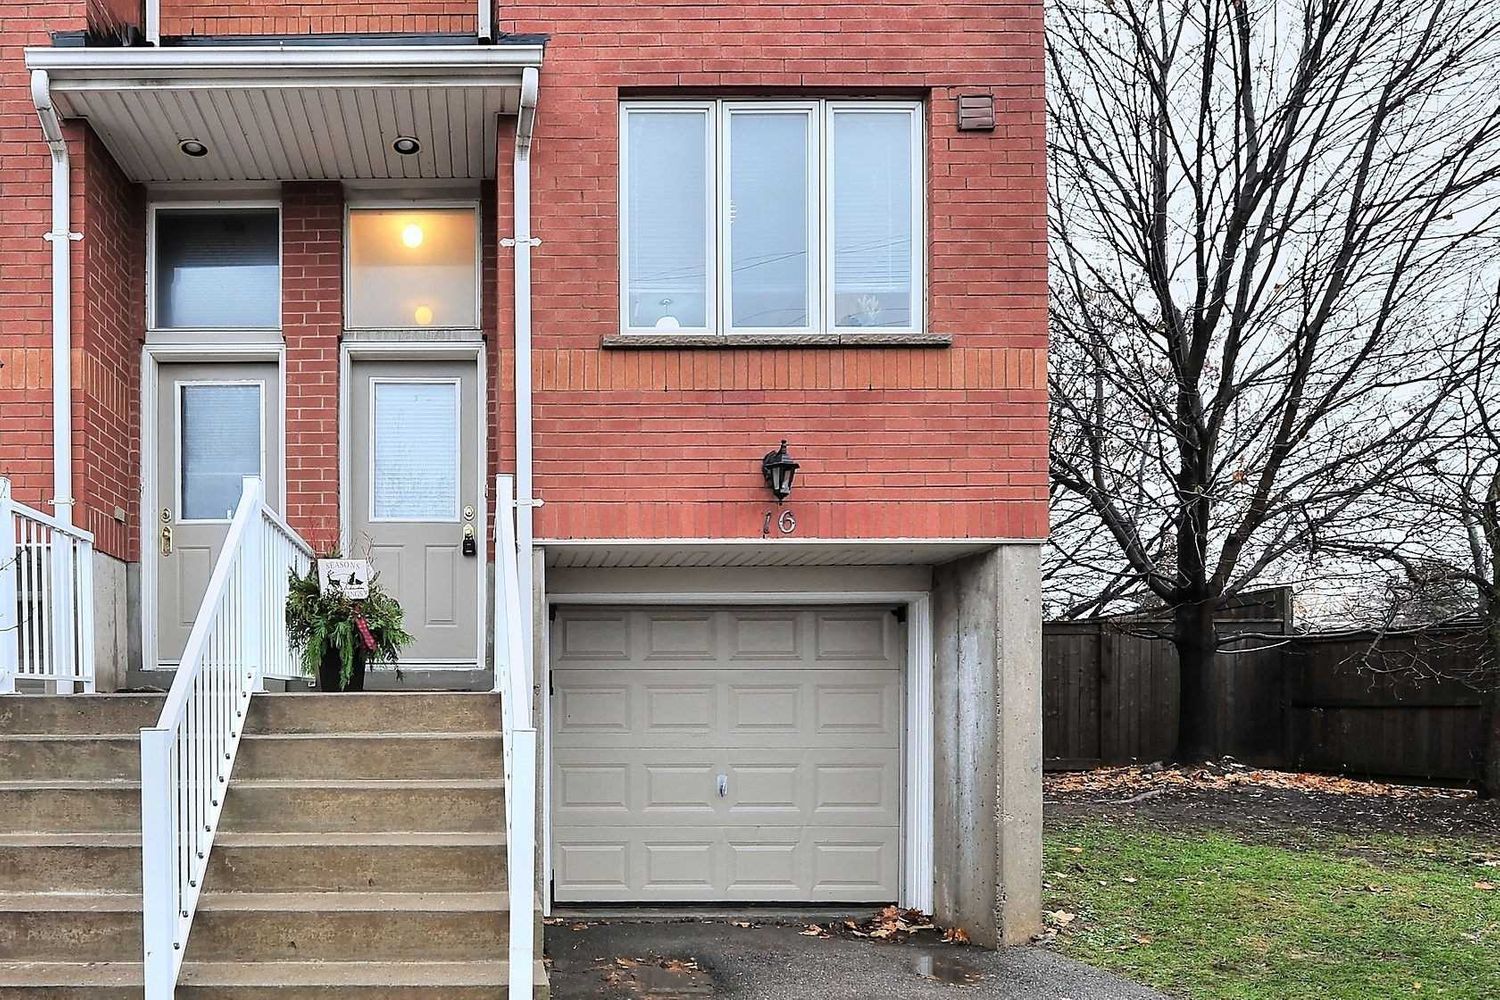 21 Elgin Mills Road W. 21 Elgin Mills Road West Townhomes is located in  Richmond Hill, Toronto - image #3 of 3